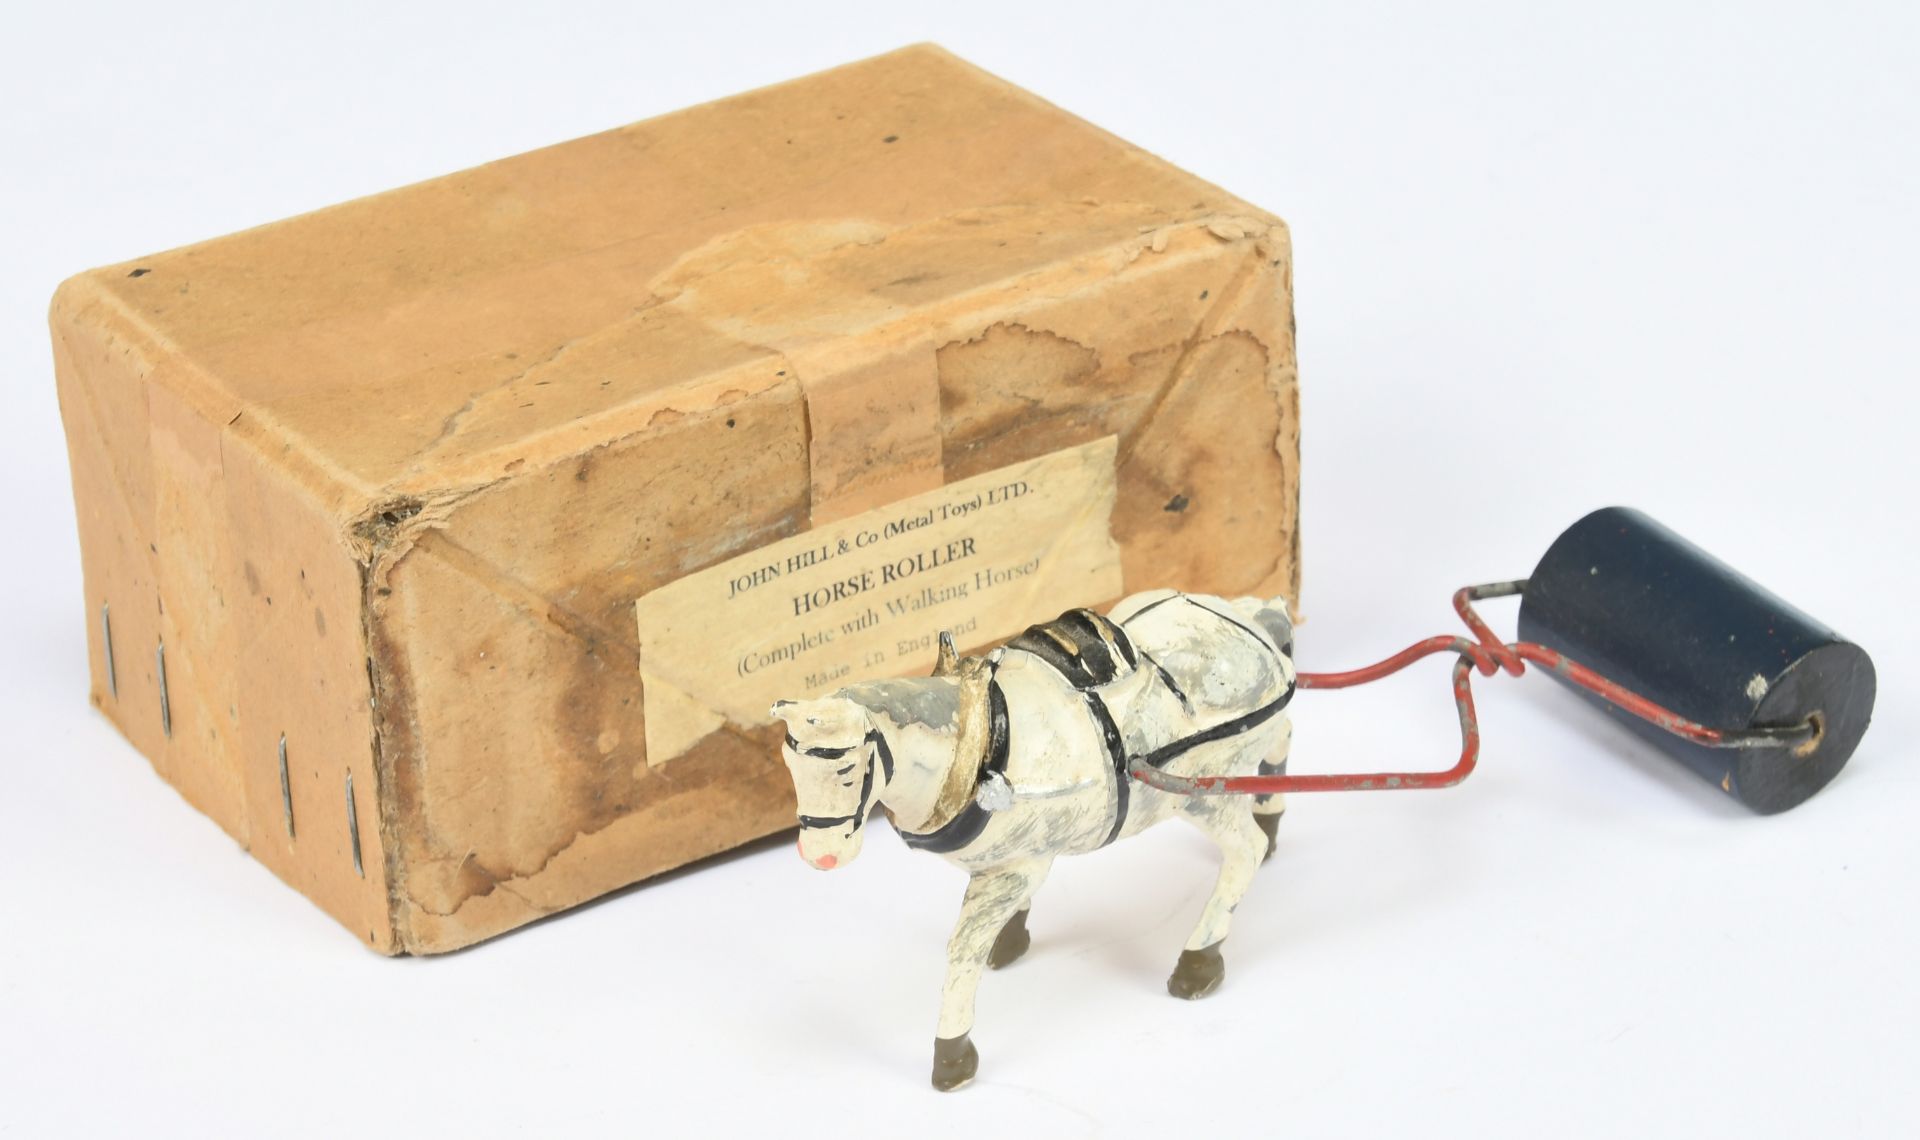 John Hill & Co - 'Horse Roller (Complete with Walking Horse)'.  Boxed, Pre-War issue